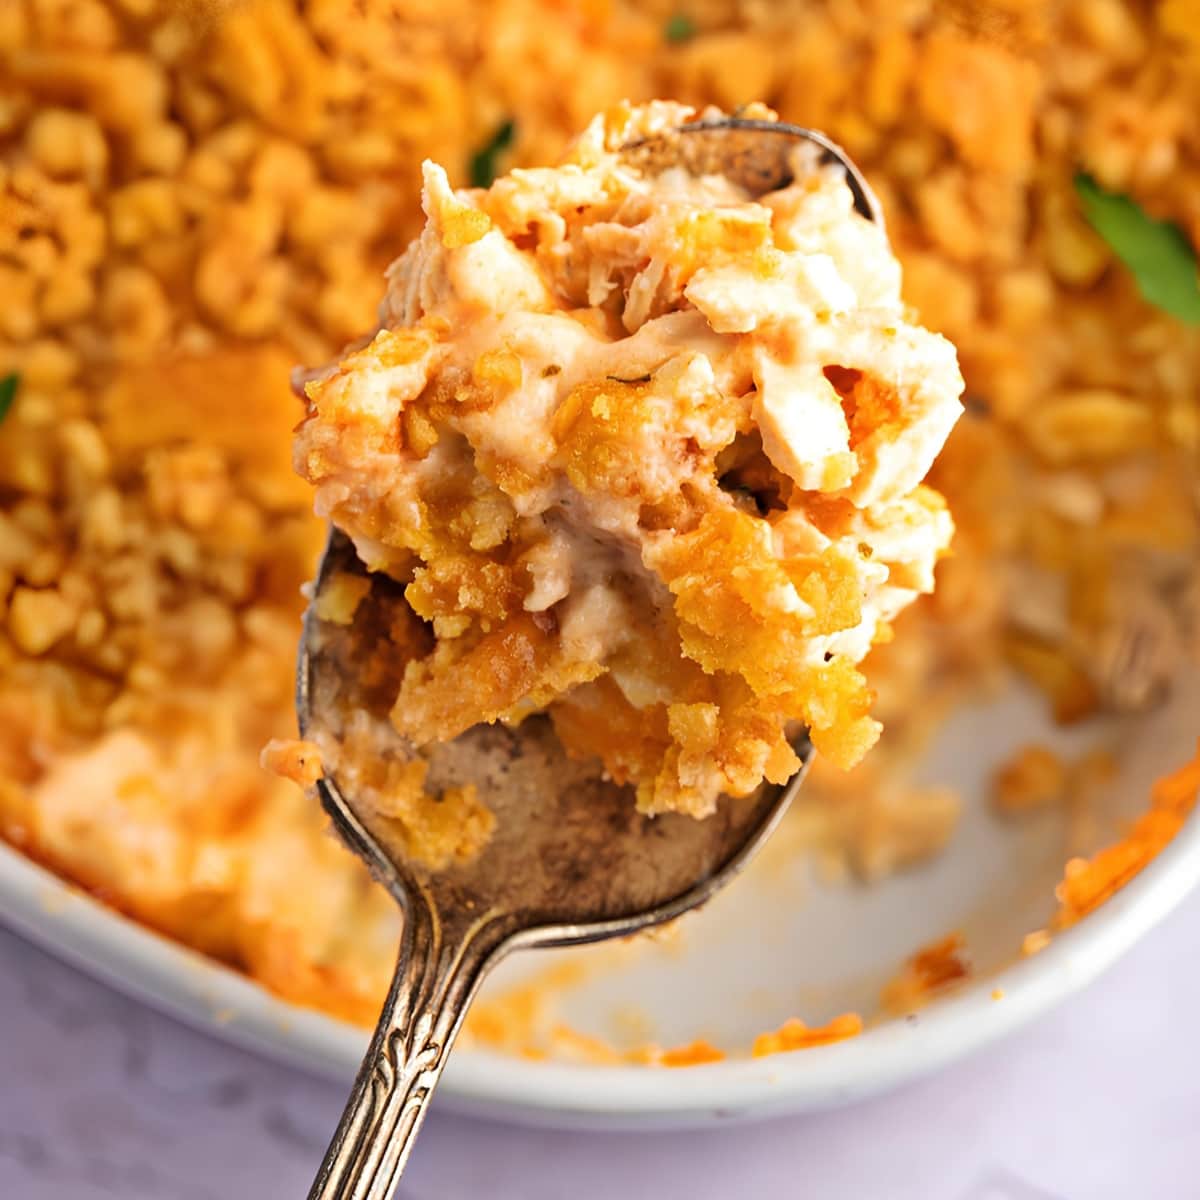 A Spoonful of Creamy Million Dollar Chicken Casserole with Crunch Ritz Topping, Full Casserole in Background